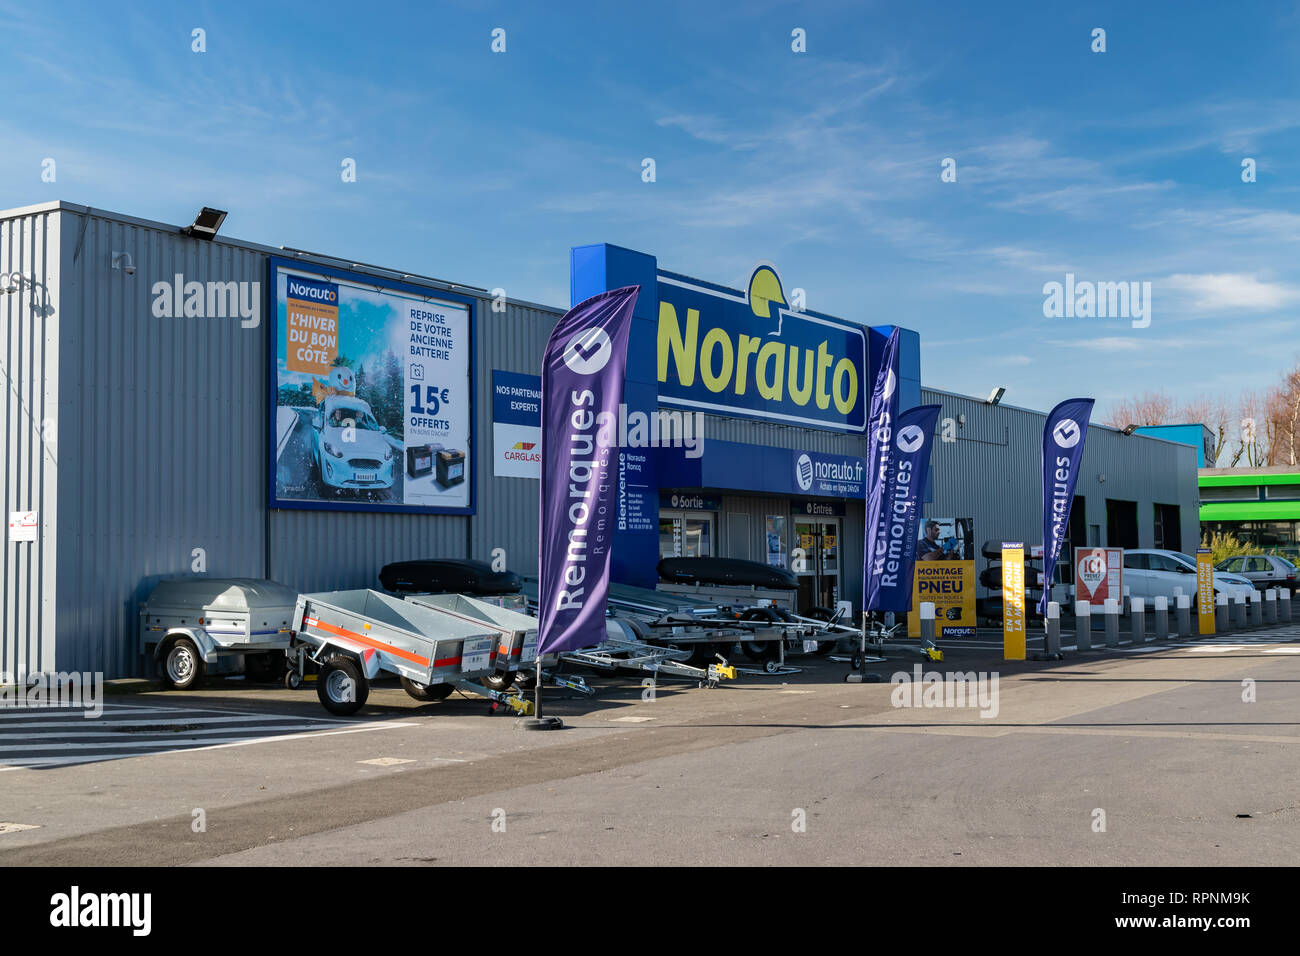 RONCQ,FRANCE-February 20,2019: Building of a Norauto car service station. Stock Photo